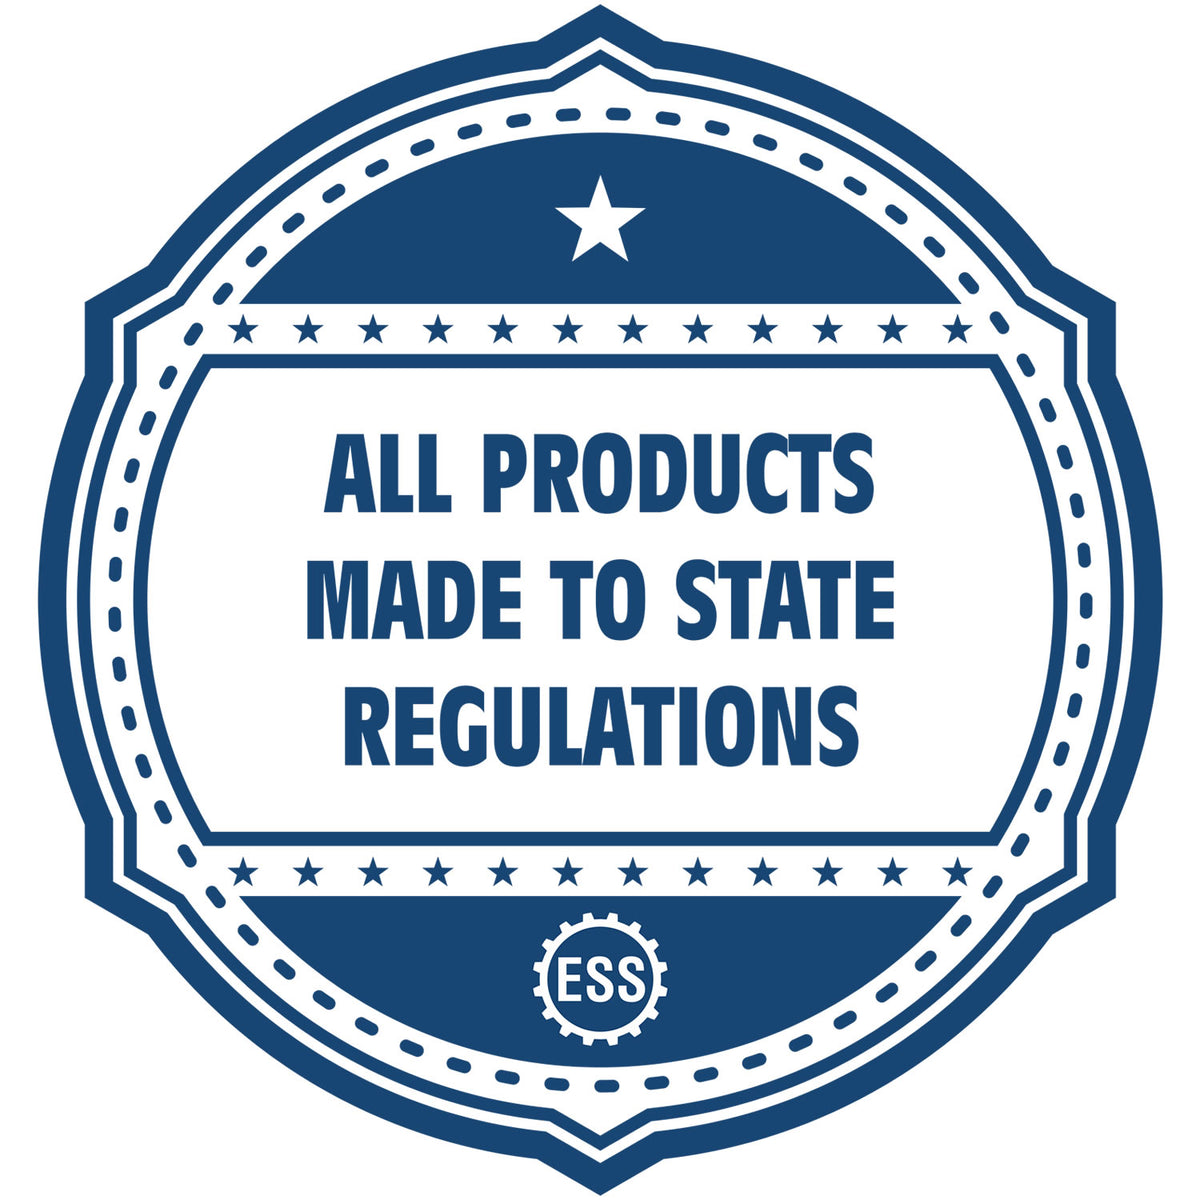 An icon or badge element for the Digital Rhode Island PE Stamp and Electronic Seal for Rhode Island Engineer showing that this product is made in compliance with state regulations.